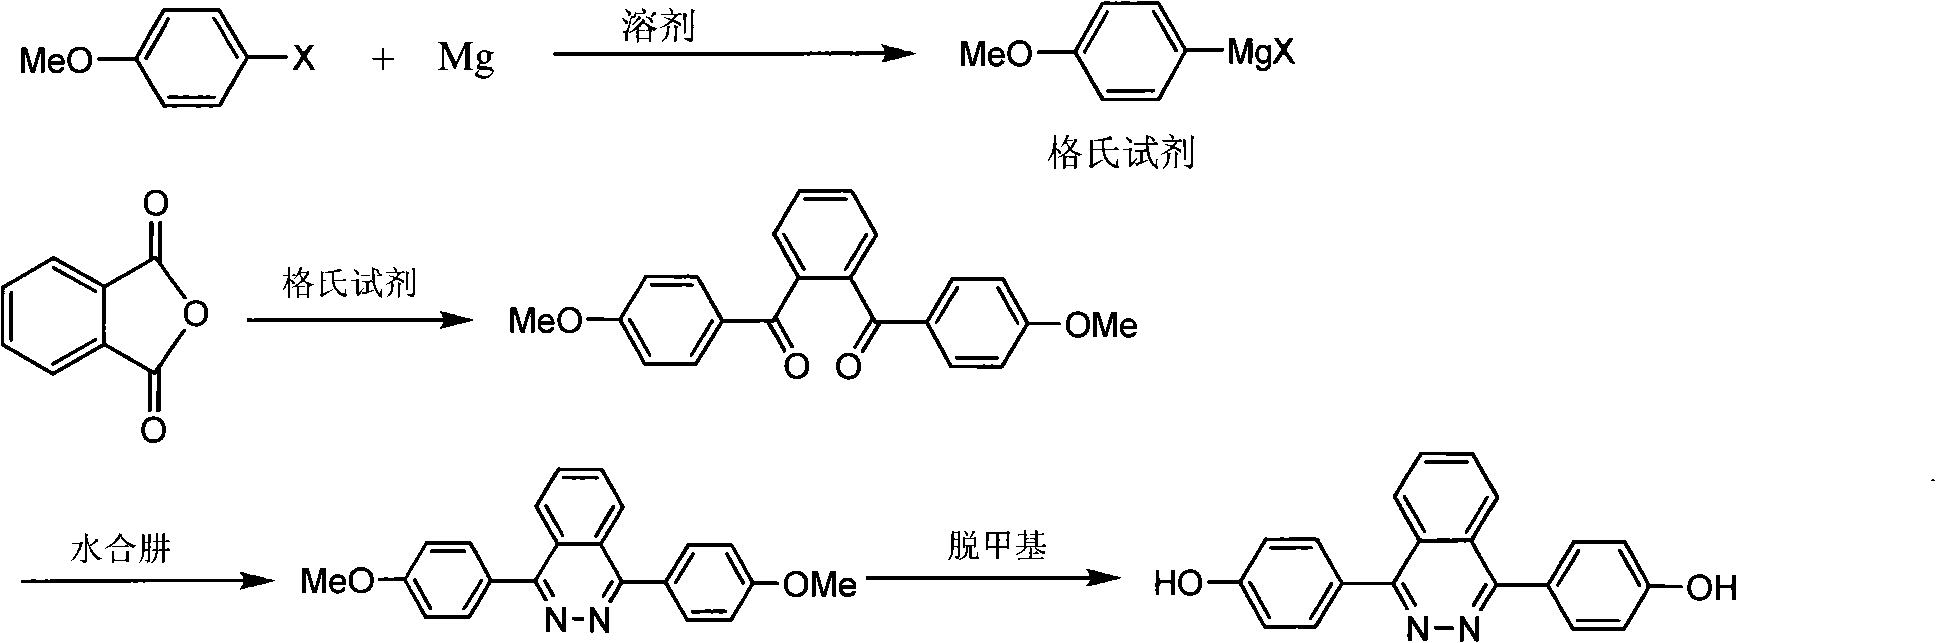 1,4-di(para hydroxybenzene) based-2,3-quinazoline and synthesis method thereof